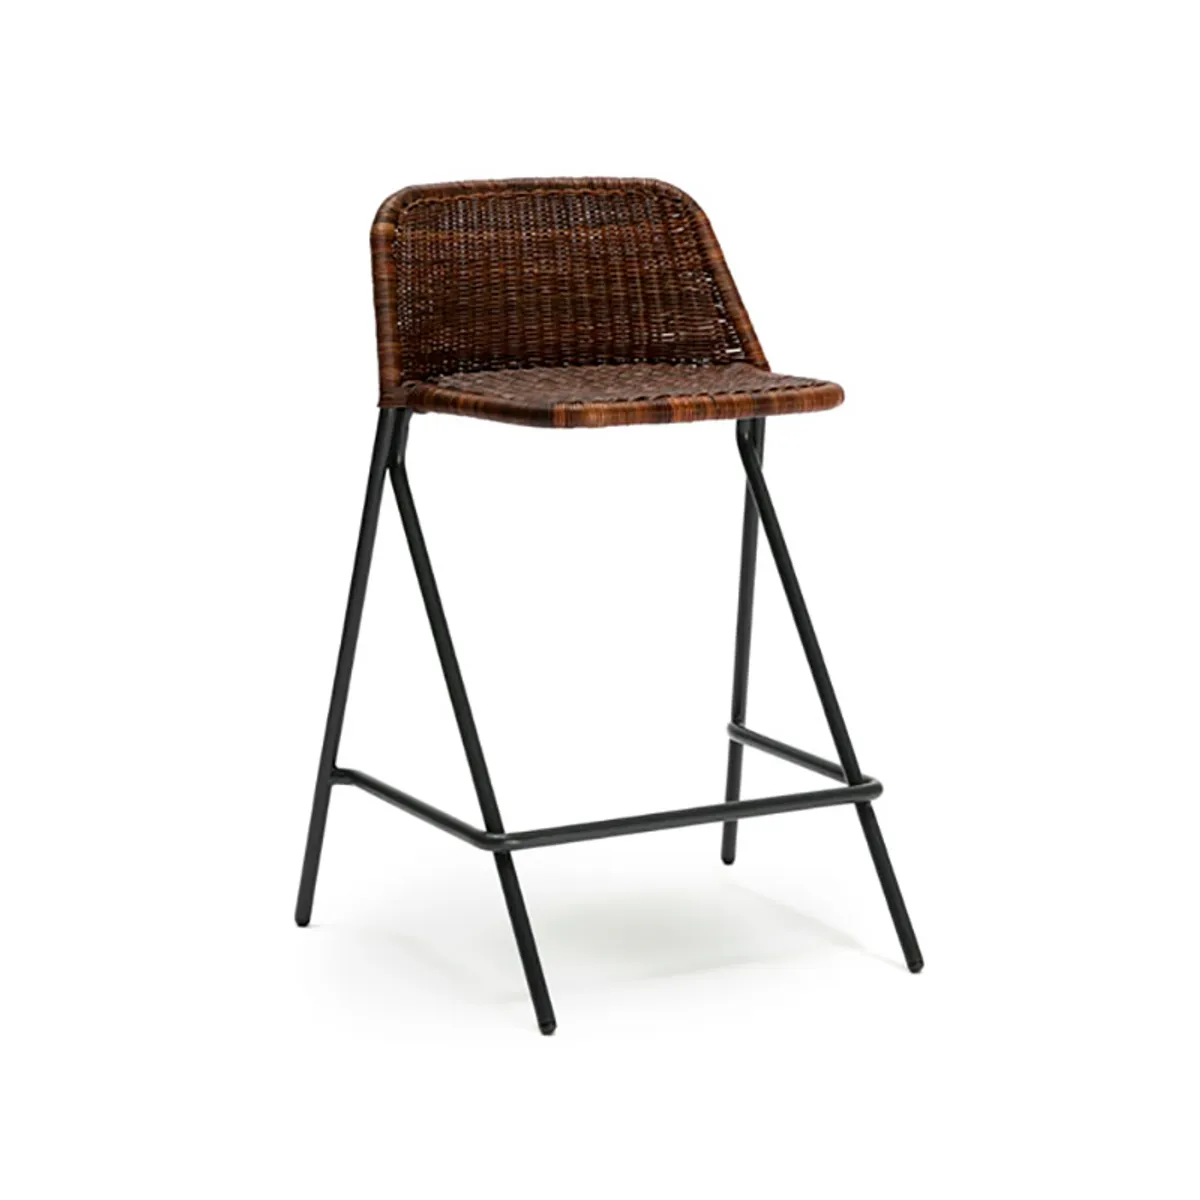 Persi Stool With Backrest Charcoal Rust Rattan And Metal Barstool Furniture For Restaurants Cafes And Hotels2